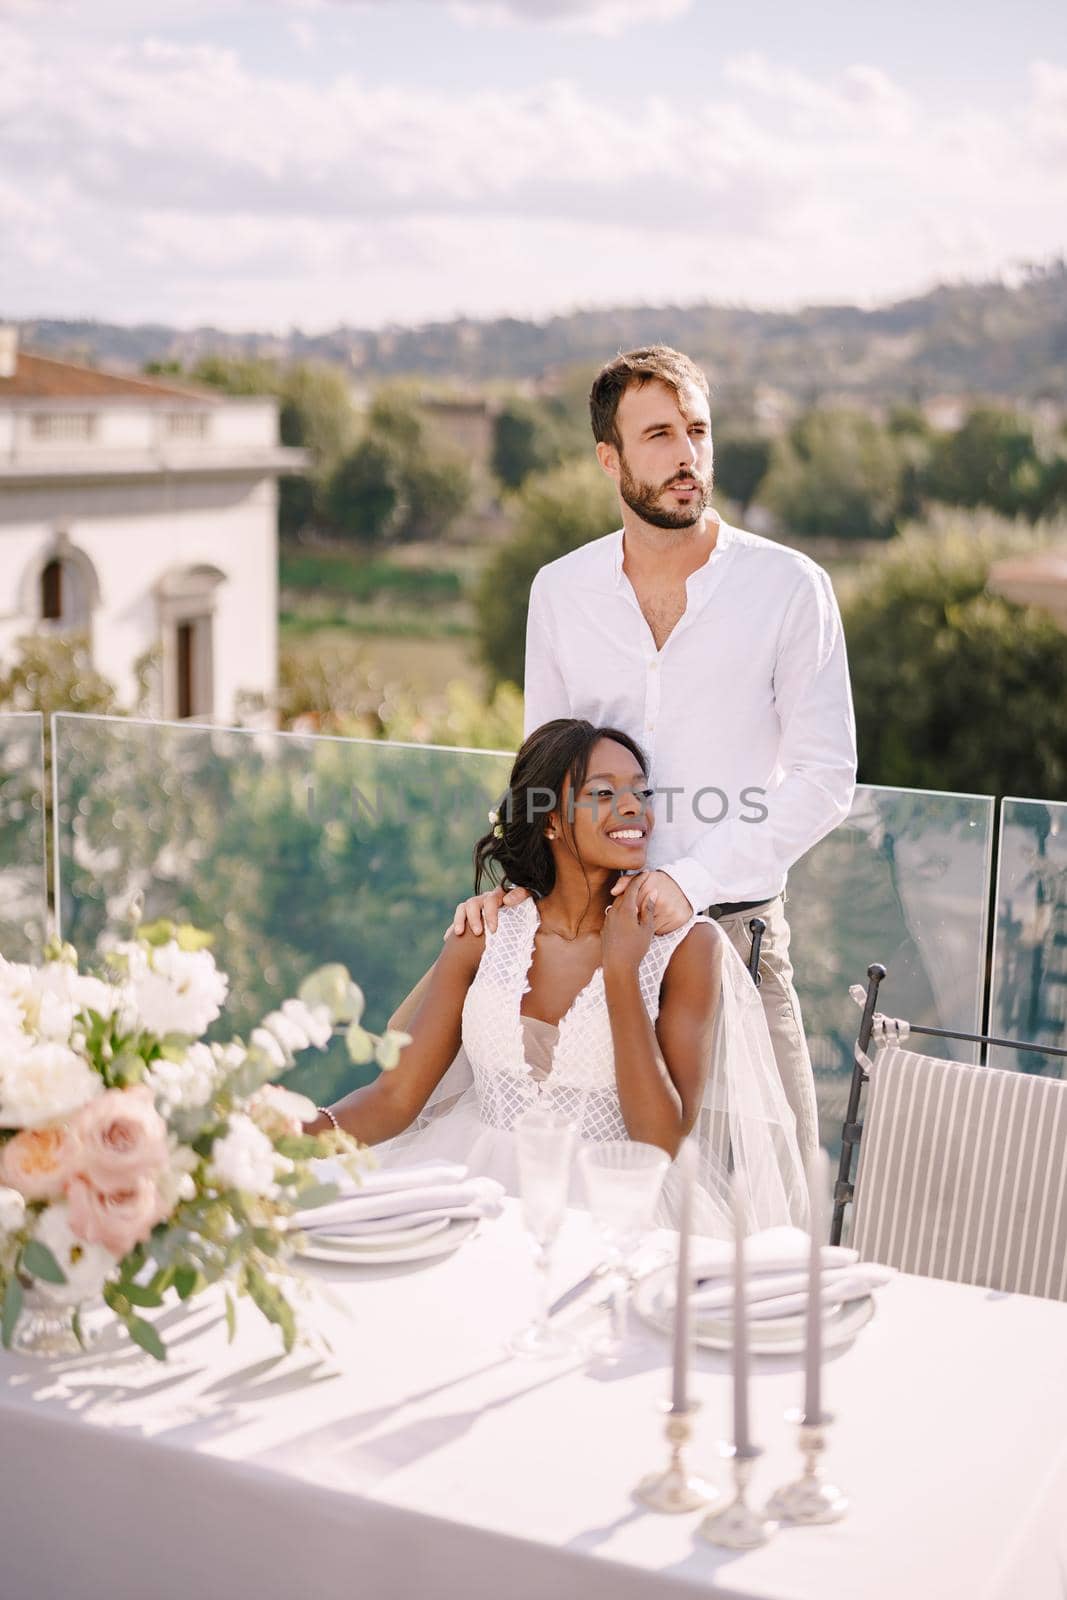 Mixed-race wedding couple. Destination fine-art wedding in Florence, Italy. African-American bride sits at wedding table, Caucasian groom hugs her shoulders.